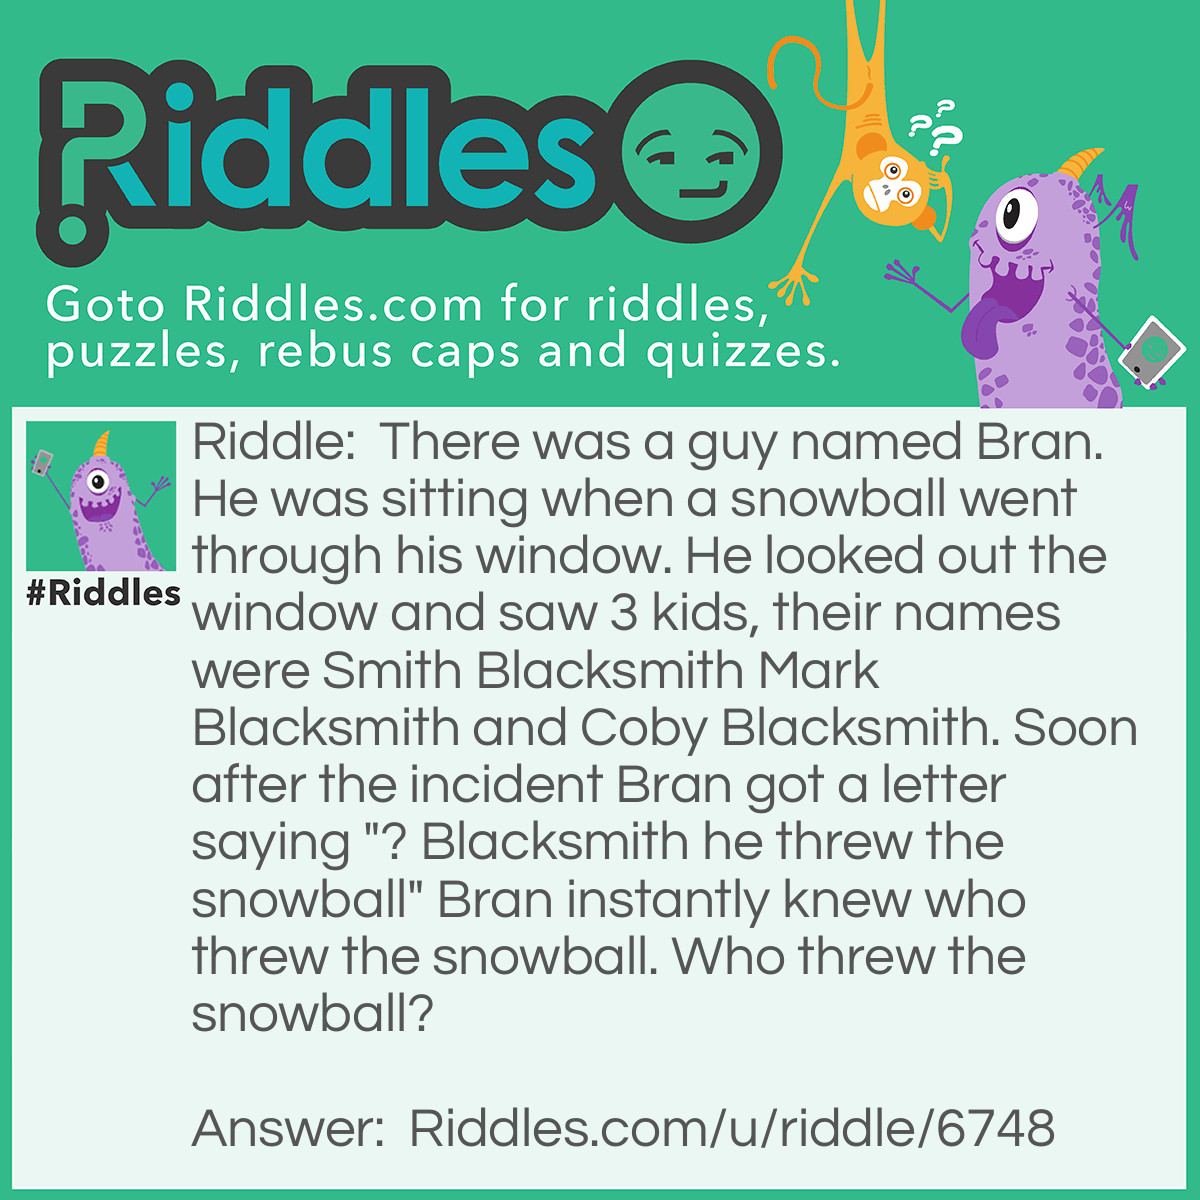 Riddle: There was a guy named Bran. He was sitting when a snowball went through his window. He looked out the window and saw 3 kids, their names were Smith Blacksmith Mark Blacksmith and Coby Blacksmith. Soon after the incident Bran got a letter saying "? Blacksmith he threw the snowball" Bran instantly knew who threw the snowball. Who threw the snowball? Answer: Mark Blacksmith because question MARK Blacksmith he threw the snowball.